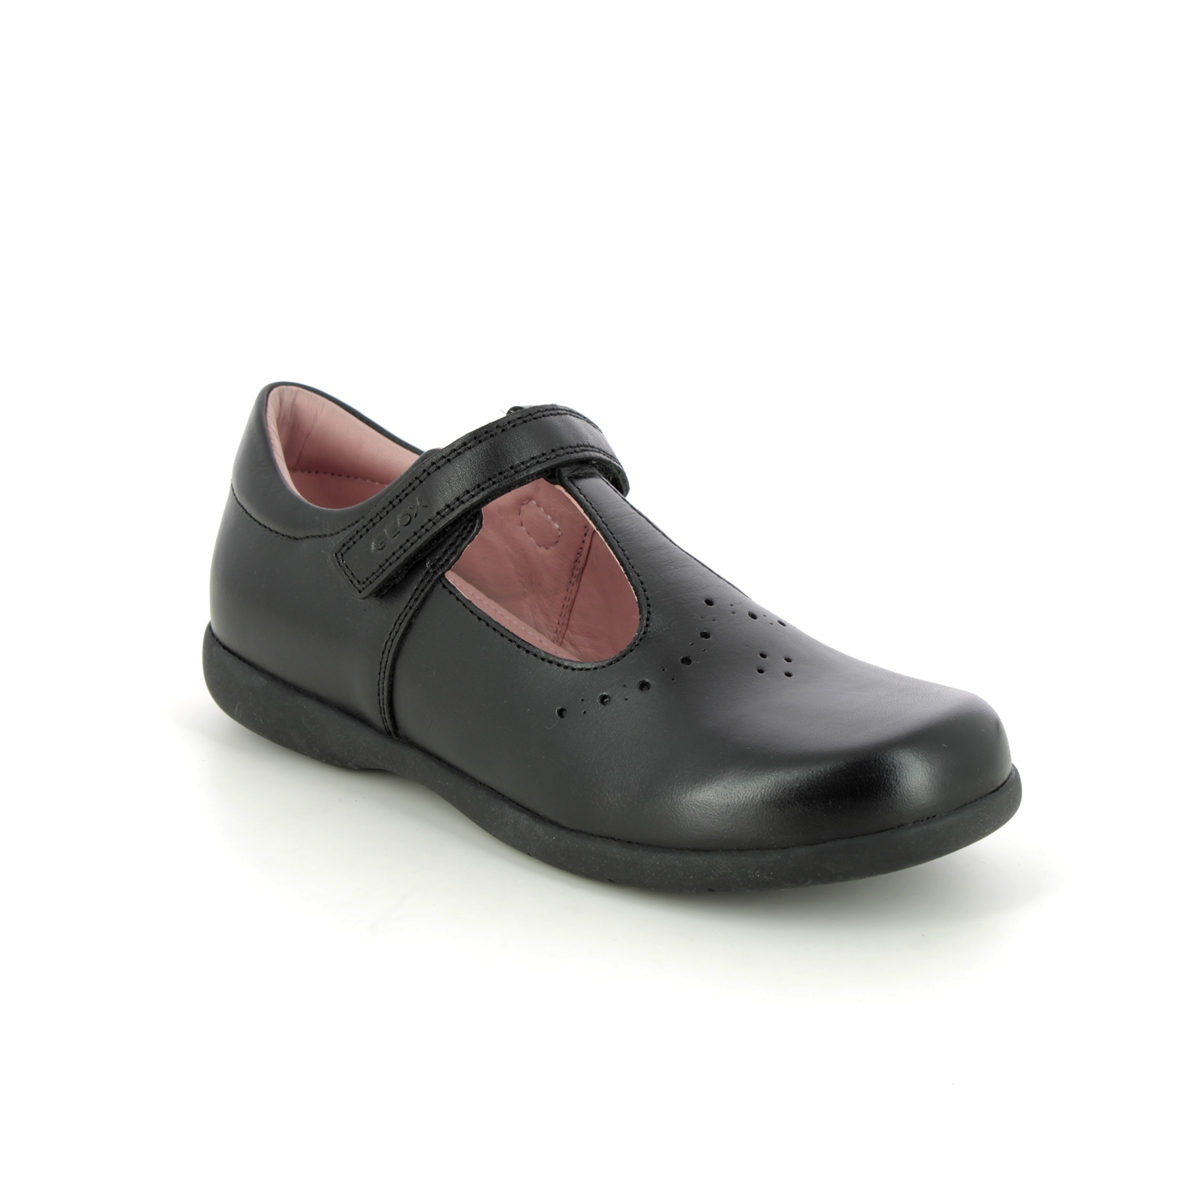 Geox - Naimara B T Bar (Black Leather) J16Fhb-C9999 In Size 34 In Plain Black Leather For School For kids